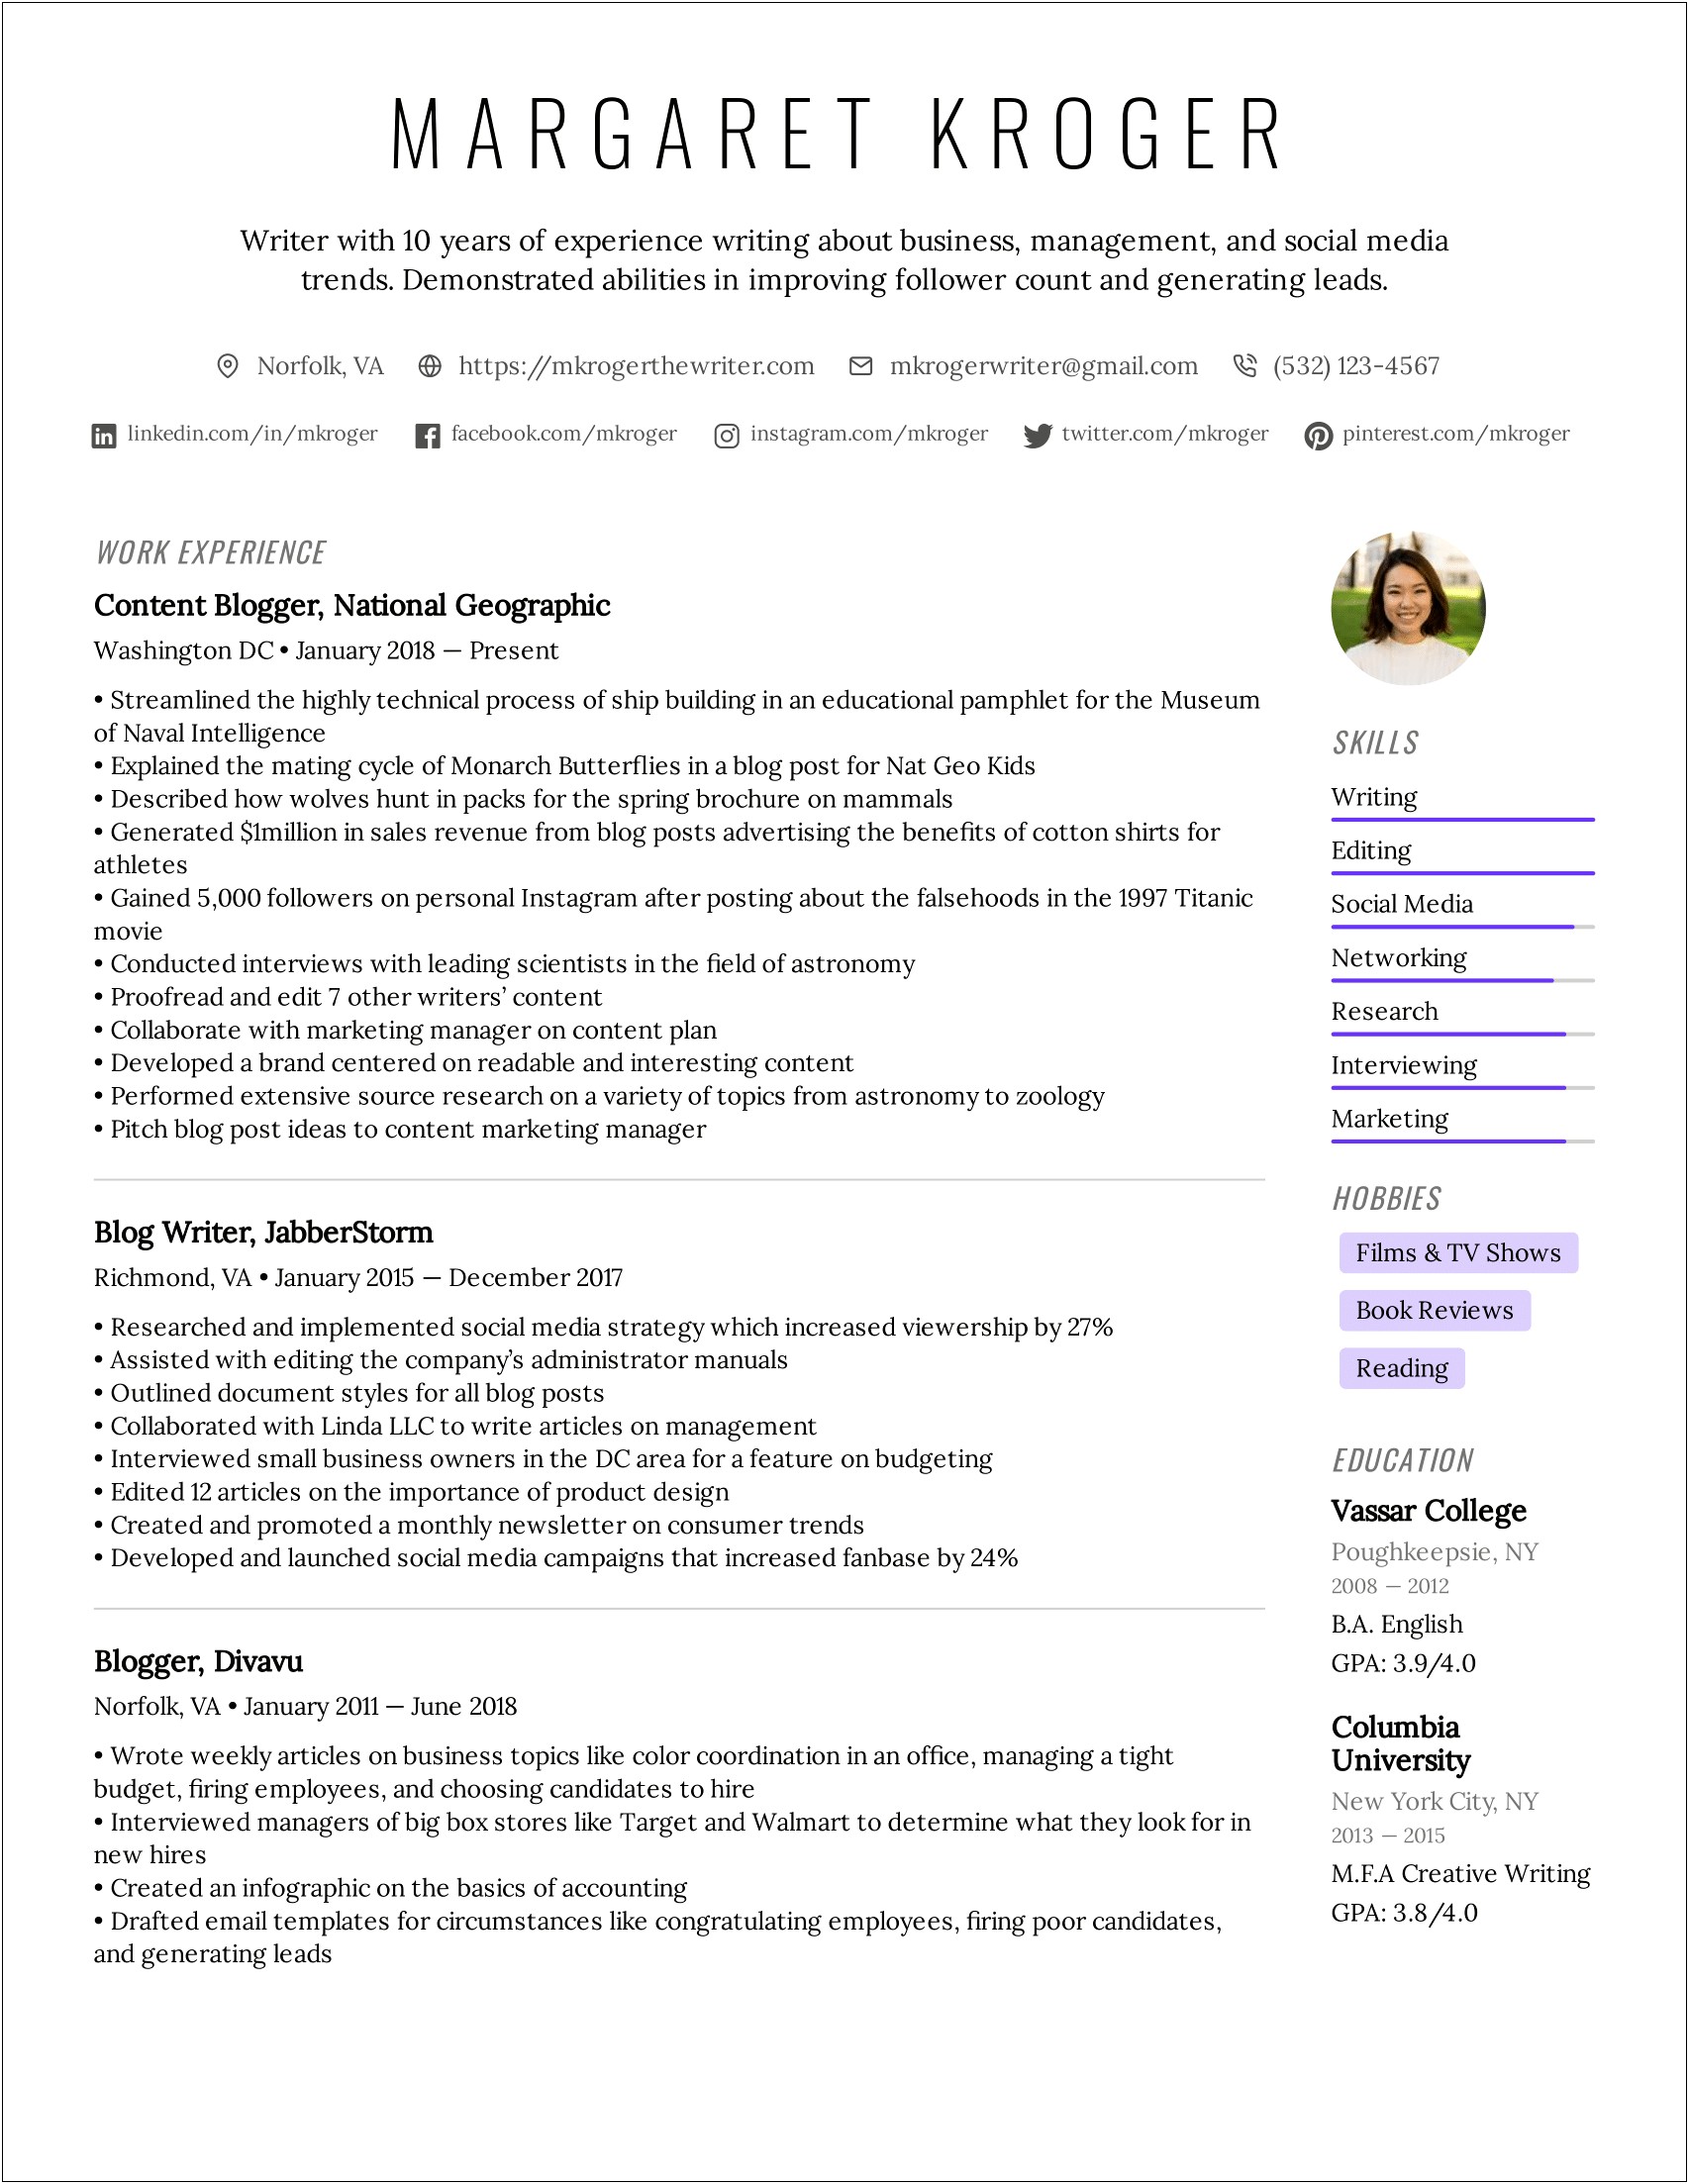 Resume Fonts That Work With Most Screening